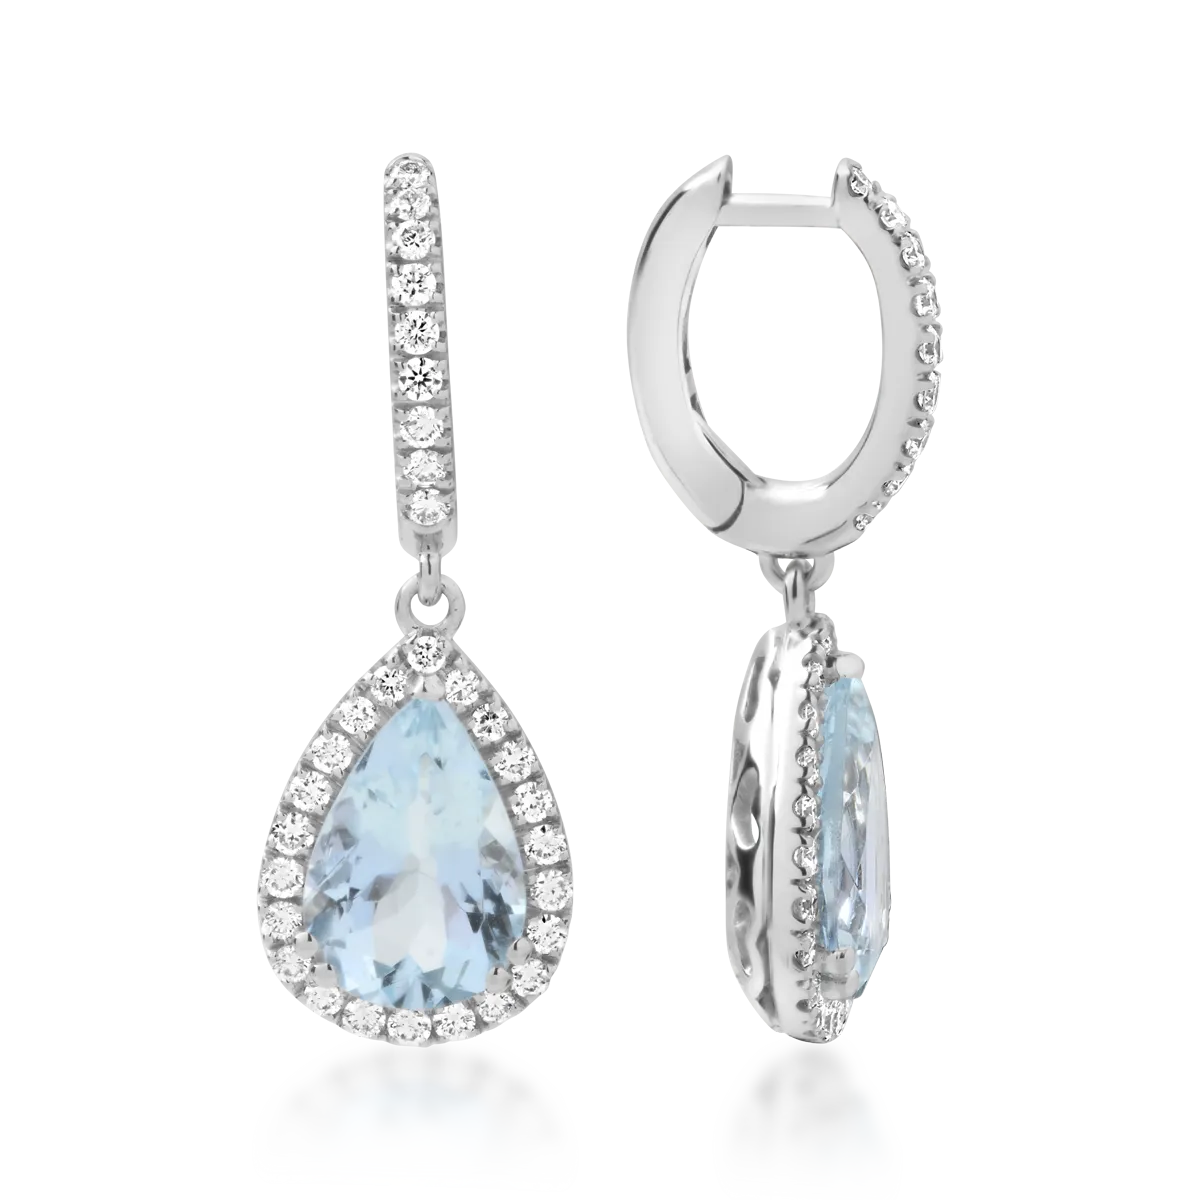 18K white gold earrings with 2.88ct aquamarines and 0.52ct diamonds